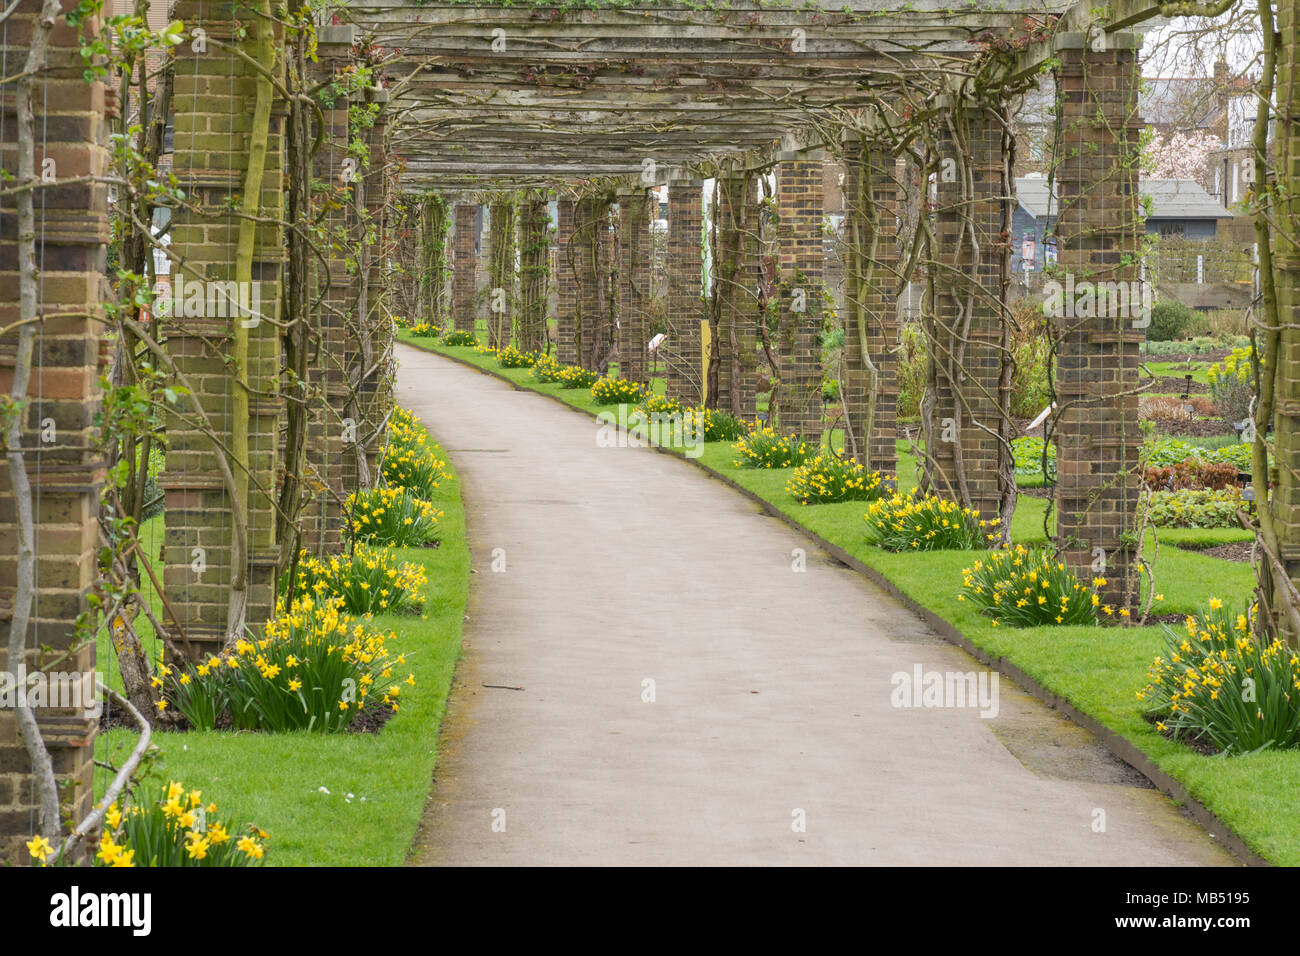 Walkway with daffodils in flower at the Royal Botanic Gardens at Kew, London, UK Stock Photo